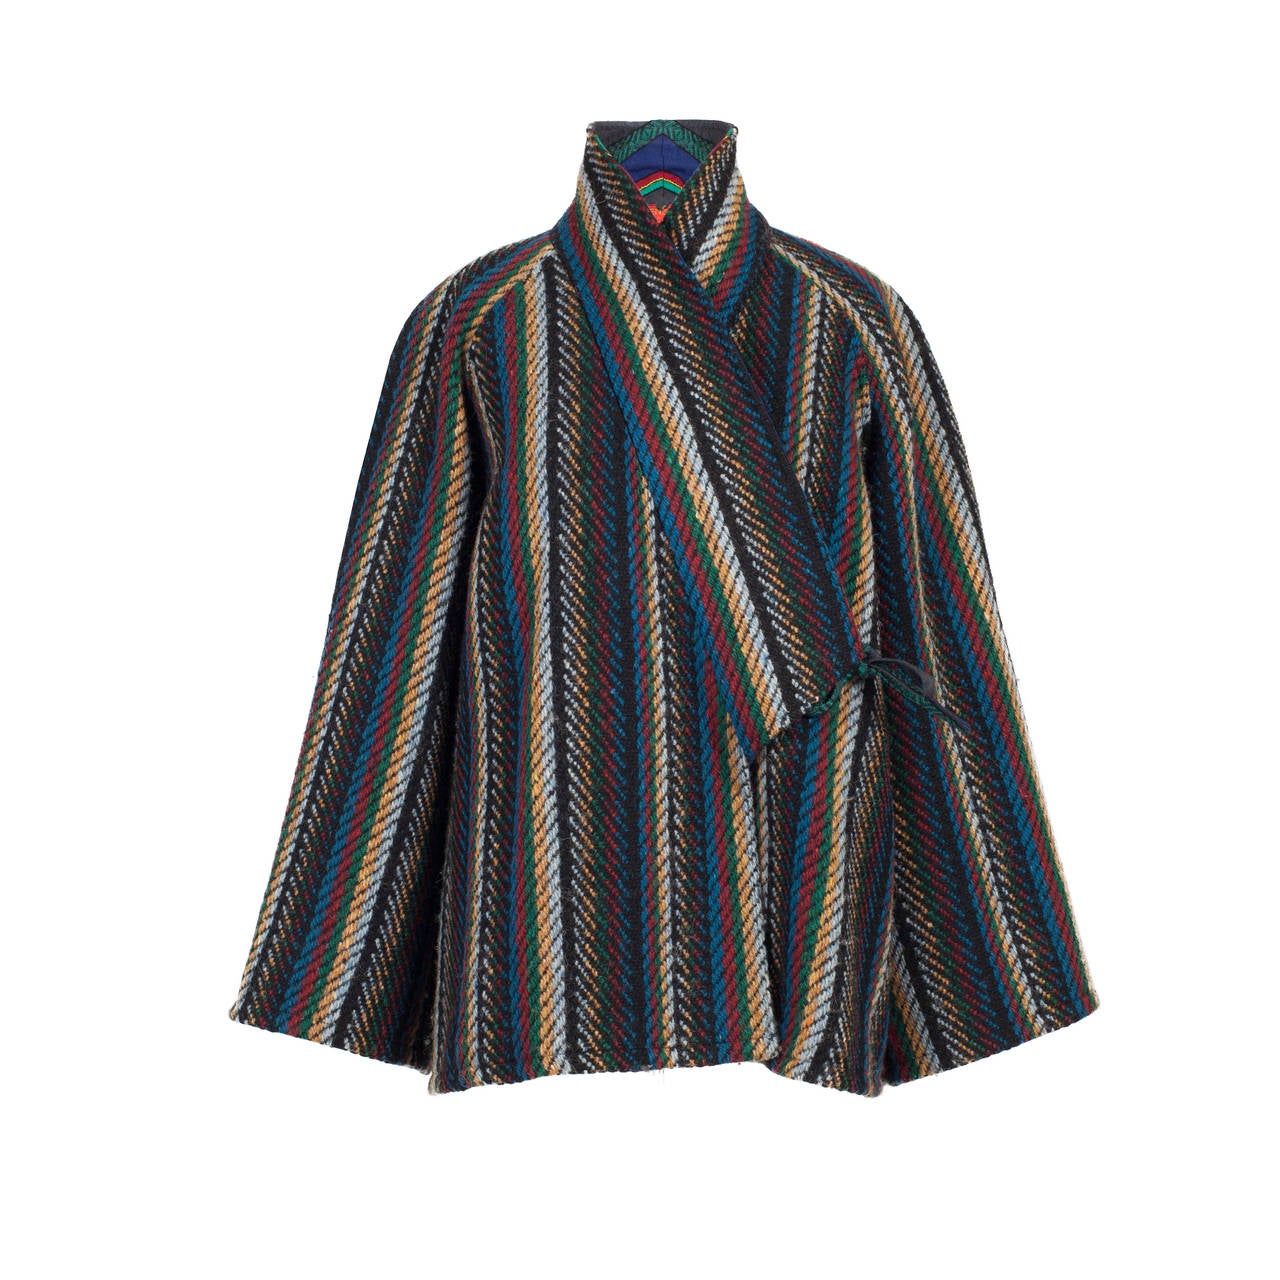 Kenzo iconic stripe coat from early 1980's. Kimono sleeve, multi colour over sized tweeds. 100% wool lining 100% acetate
Size :  EU 38 ( US 6 - 8)
Measurements : 
Shoulders -  approx. 50 cm
sleeves length - approx. 60 cm
sleeves width -  approx